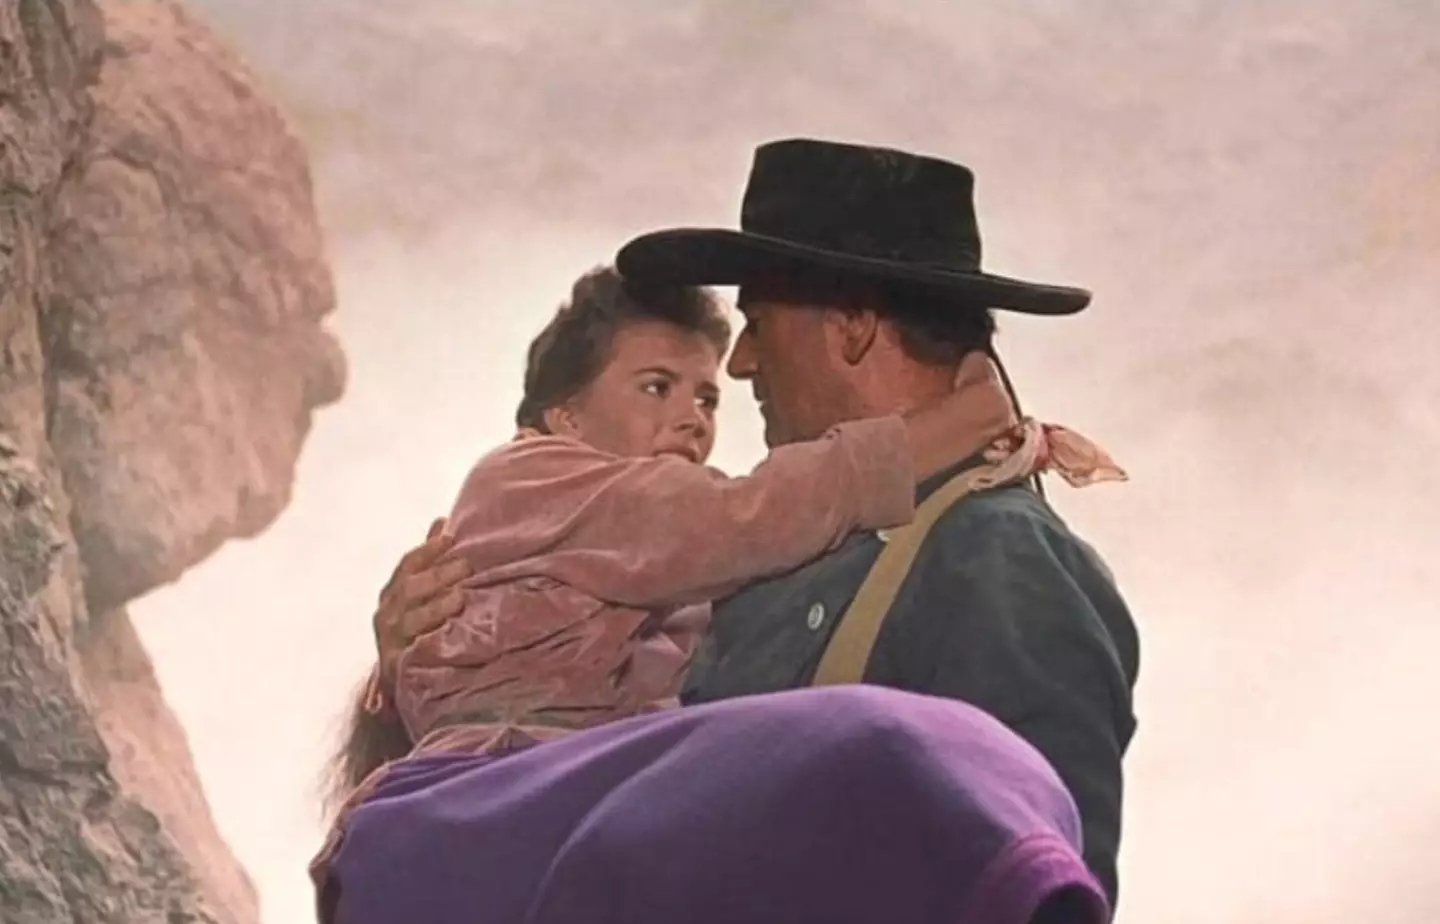 John Wayne and Natalie Wood in The Searchers (1956).